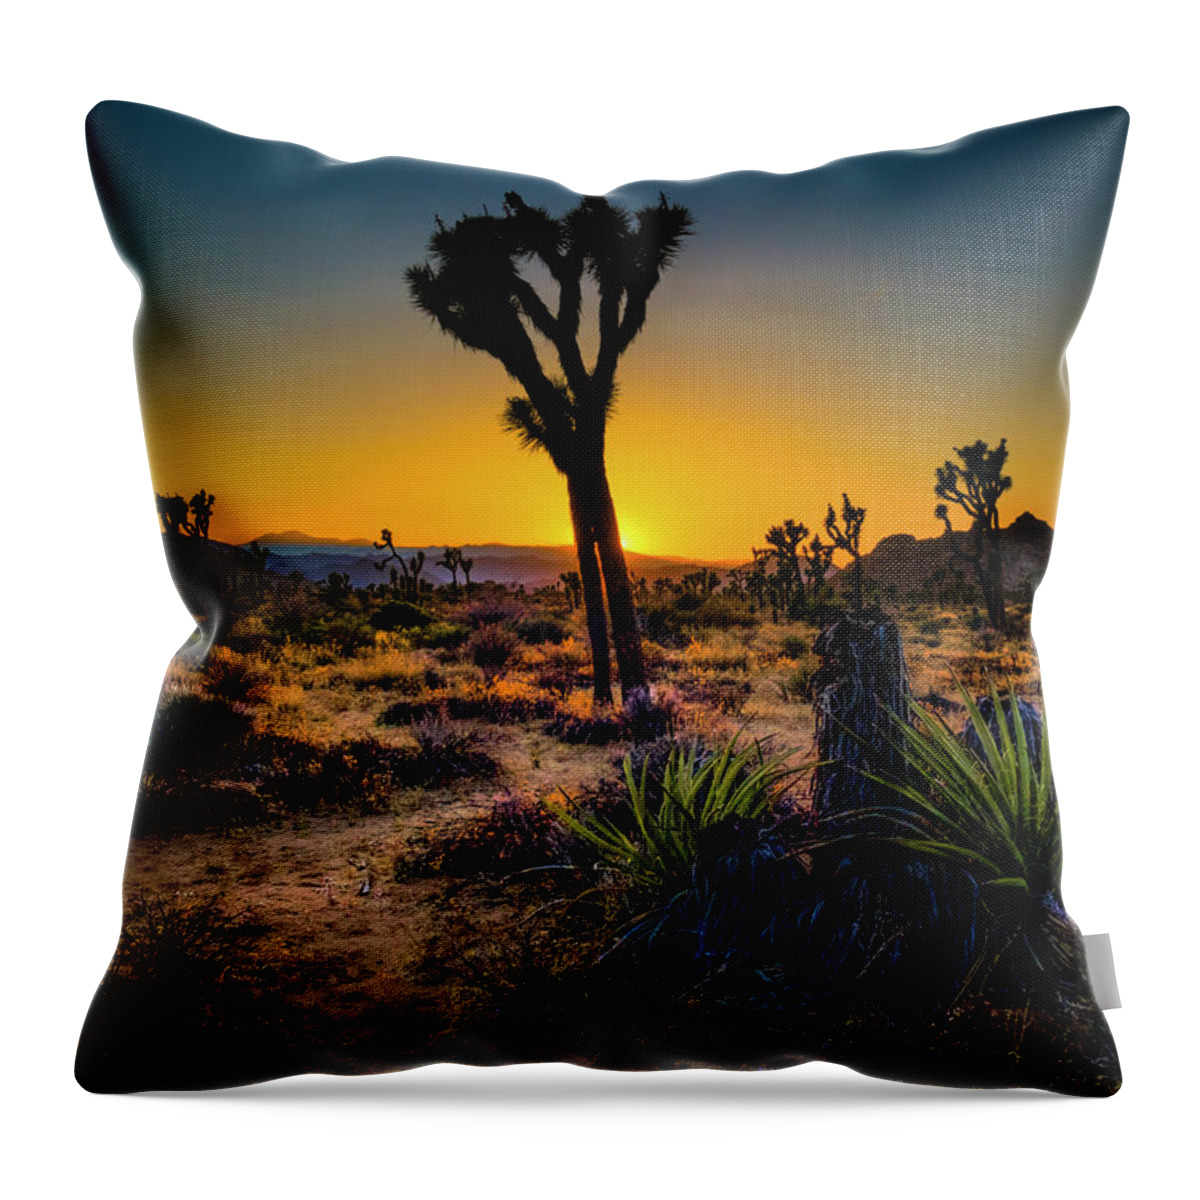 Dawn Throw Pillow featuring the photograph Dawn of the Morning by Sandra Selle Rodriguez